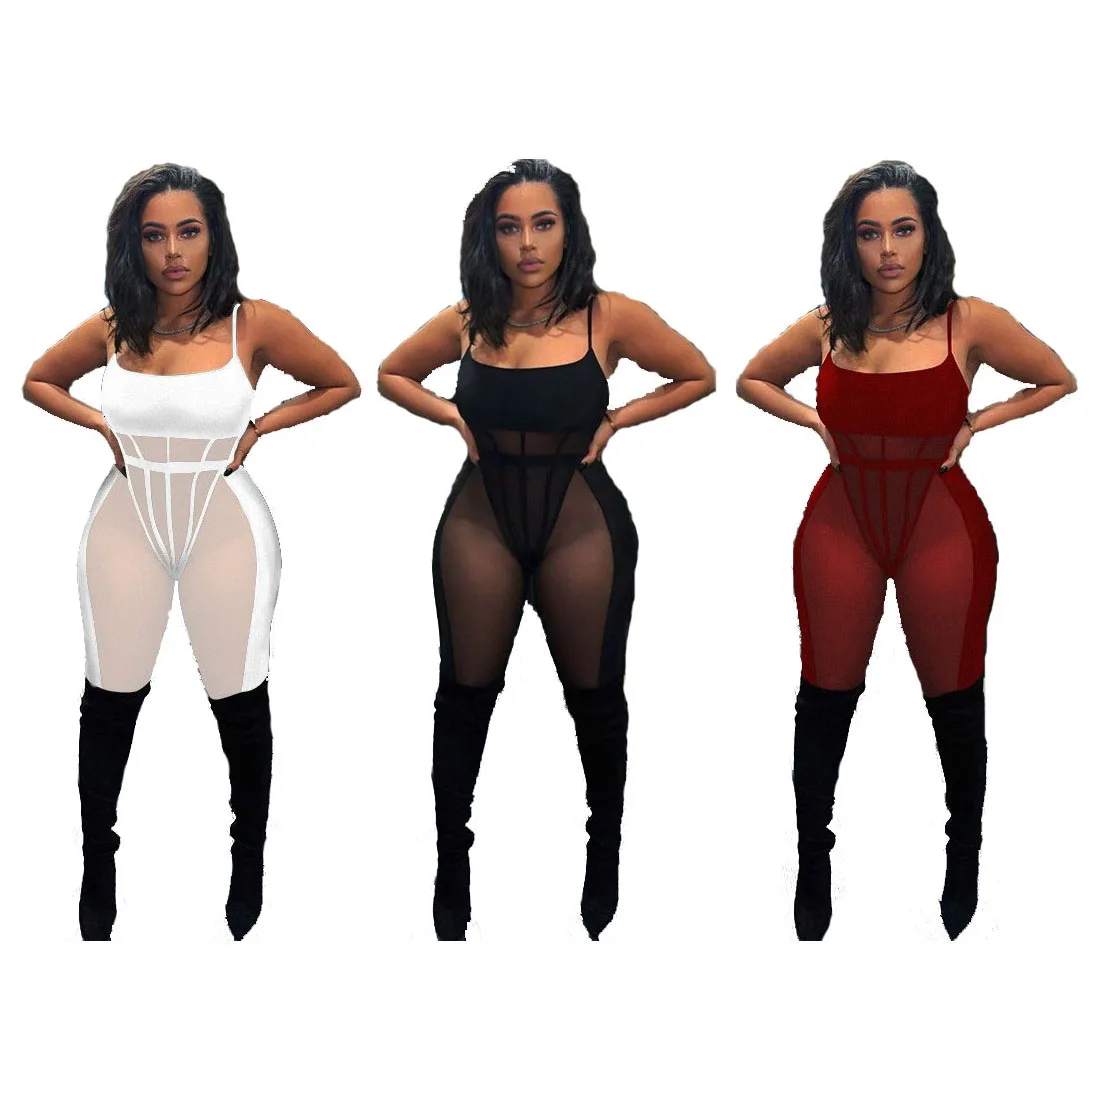 

Foma Clothing K20925S 2021 sleeveless perspective mesh jumpsuits tight pants ladies sexy two-piece sets for women, 3 colors